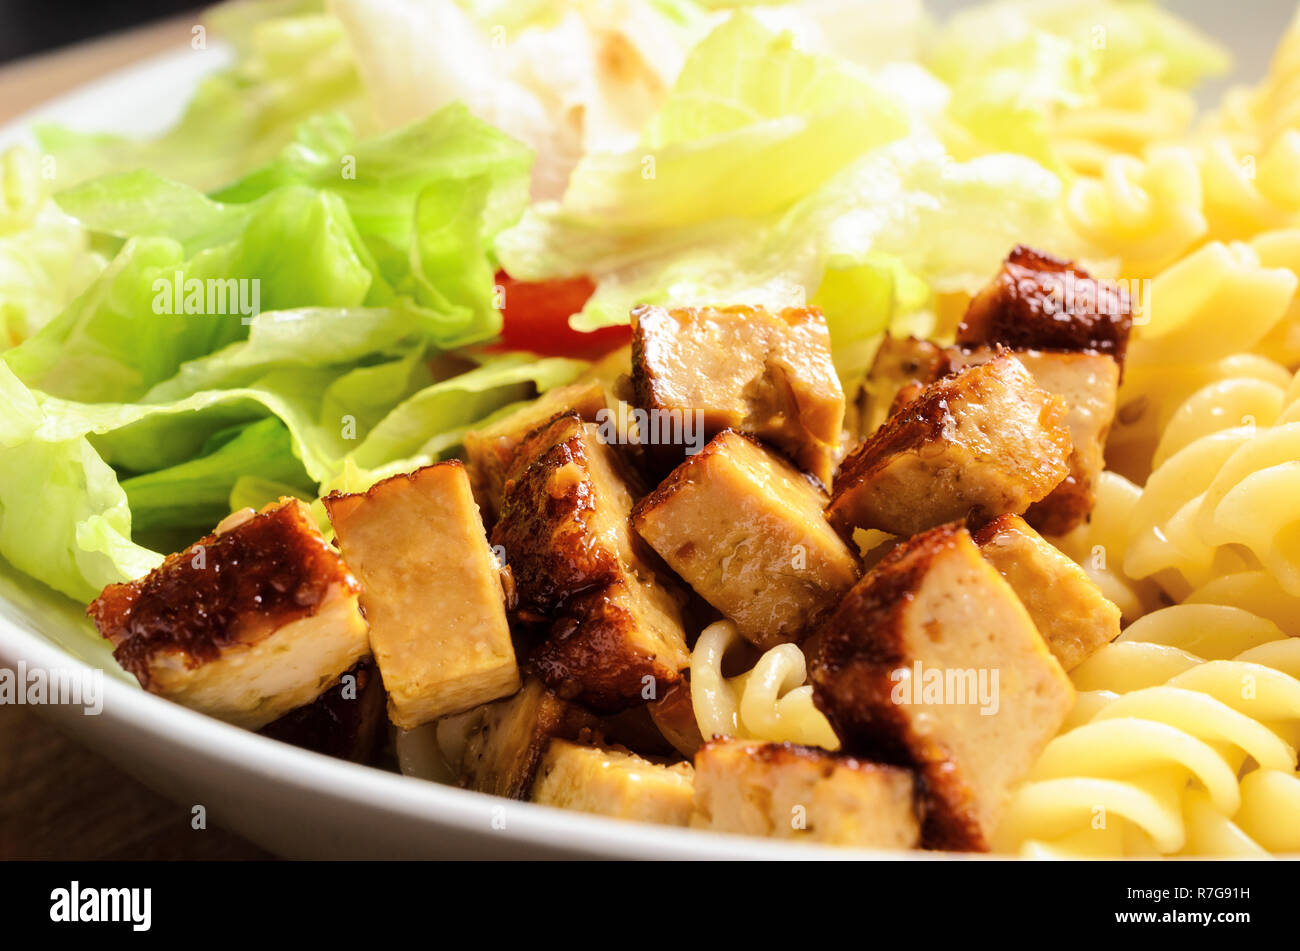 Close up of cooked tofu pieces with pasta and salad in a white bowl on light wood table. Vegetarian and vegan meal. Stock Photo